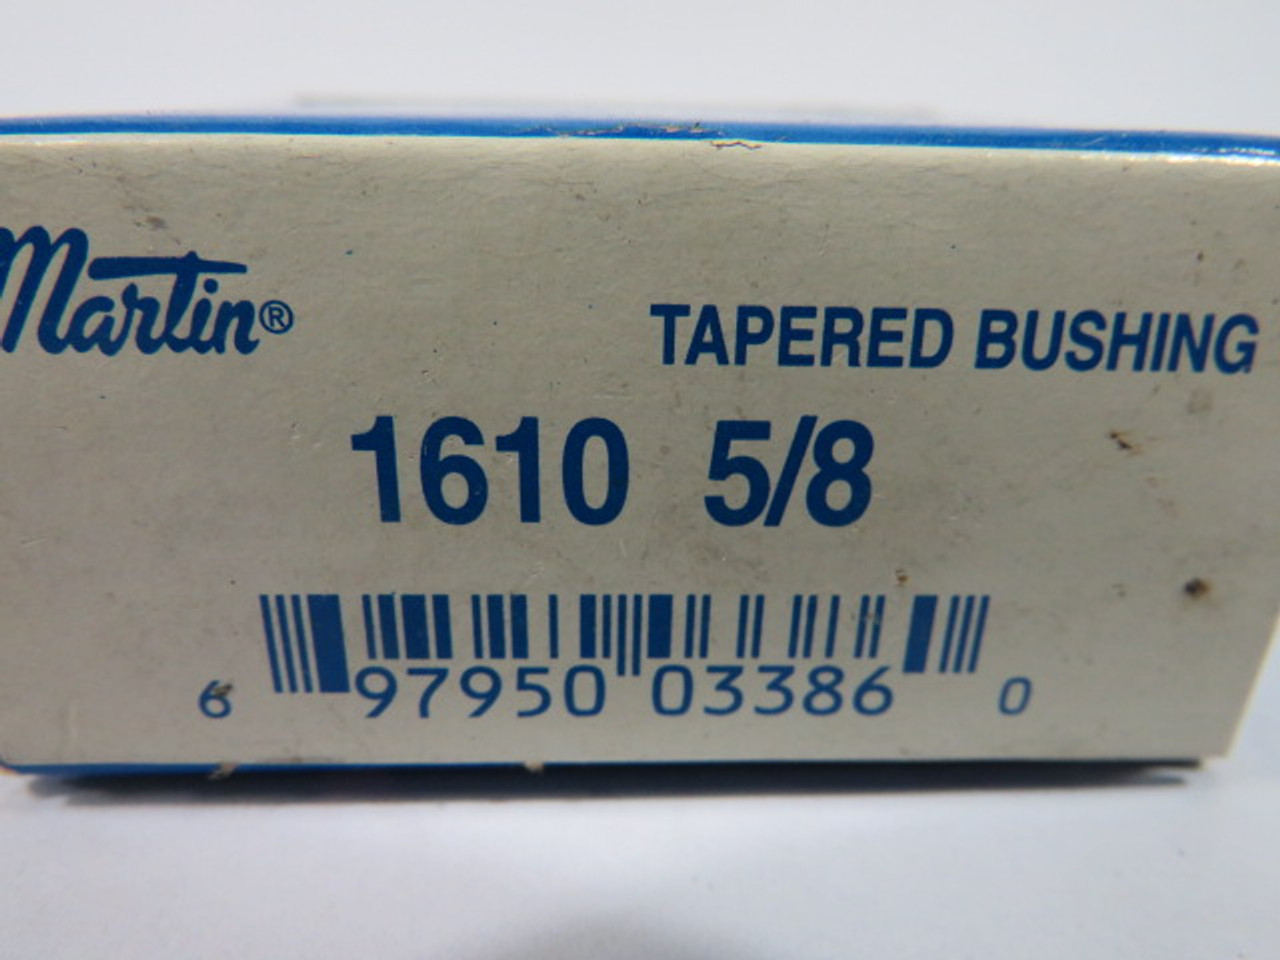 Martin 1610-5/8 Tapered Bushing 2-1/4" OD 5/8" Bore 1" LTB USED